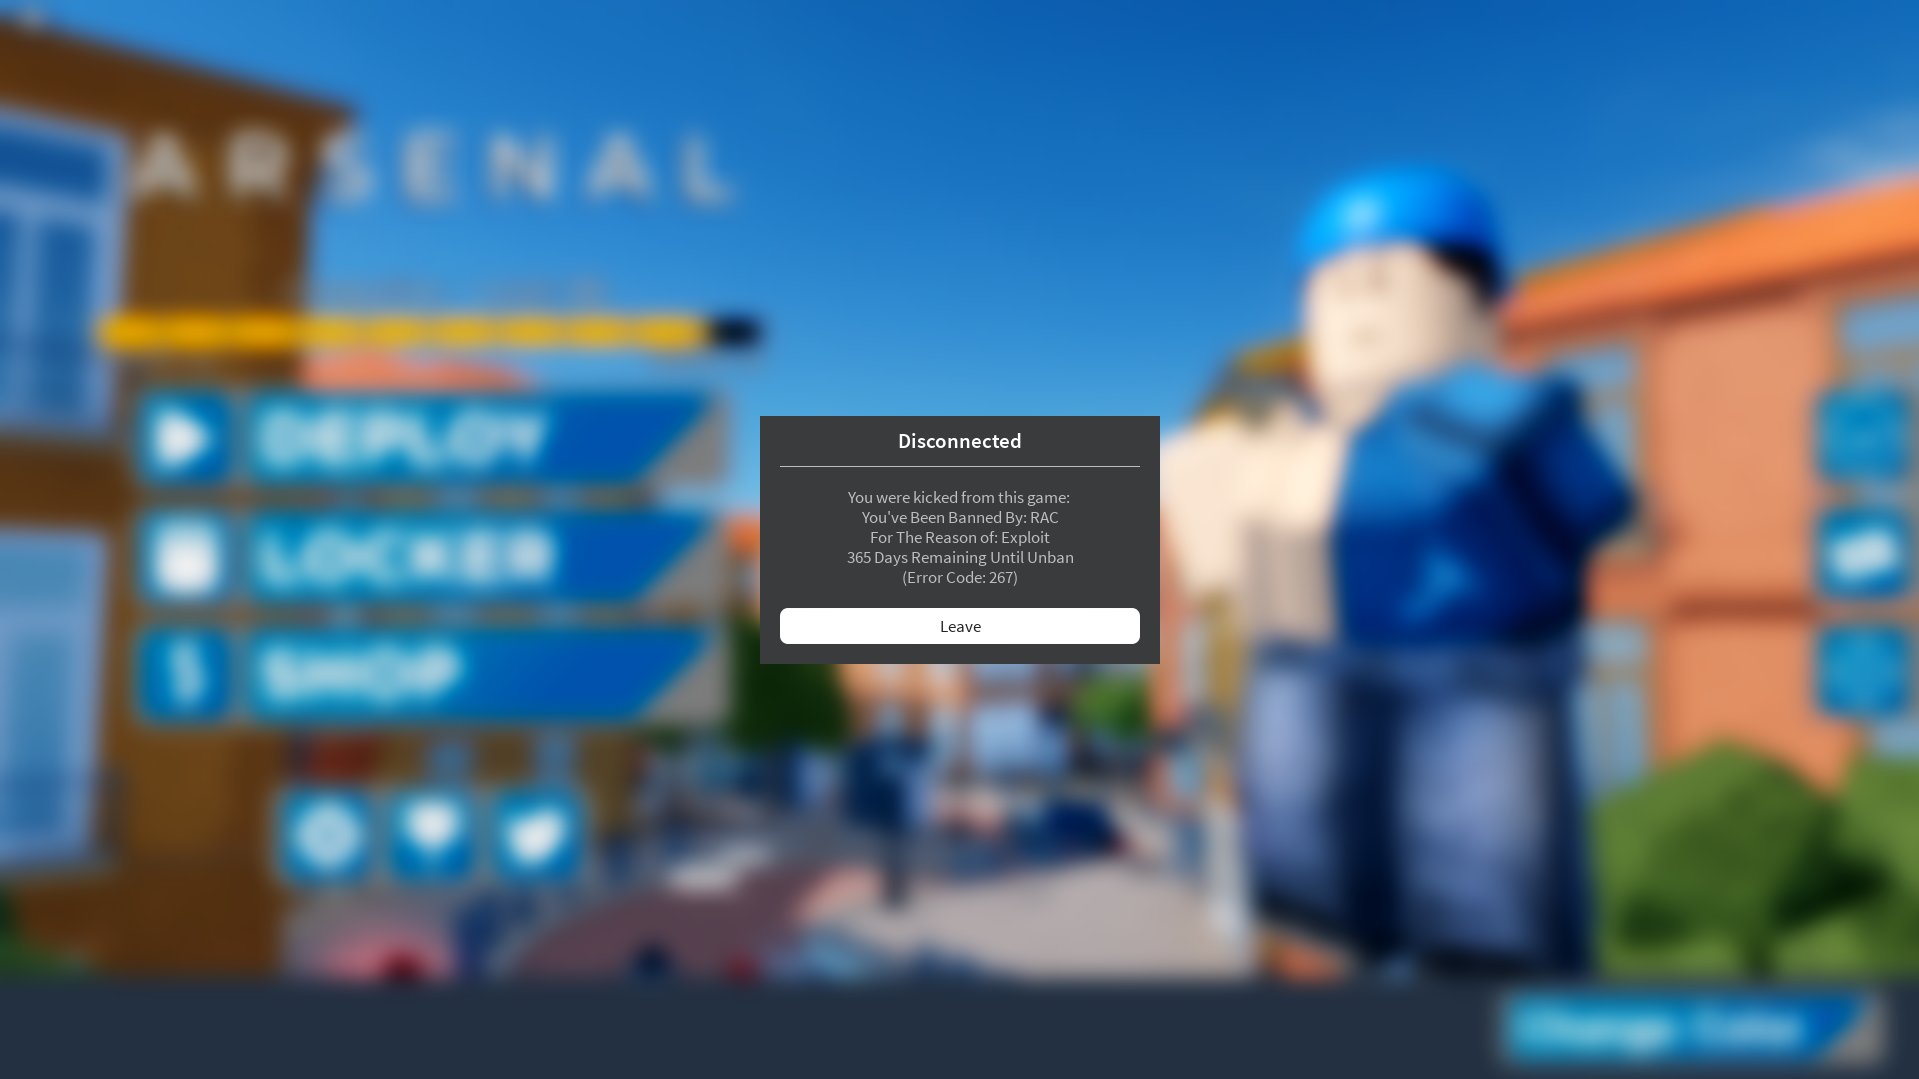 Creepy On Twitter When You Get Banned For Cheating On Arsenal It S Ok I Know I M A Sweat At The Game - roblox arsenal cheats